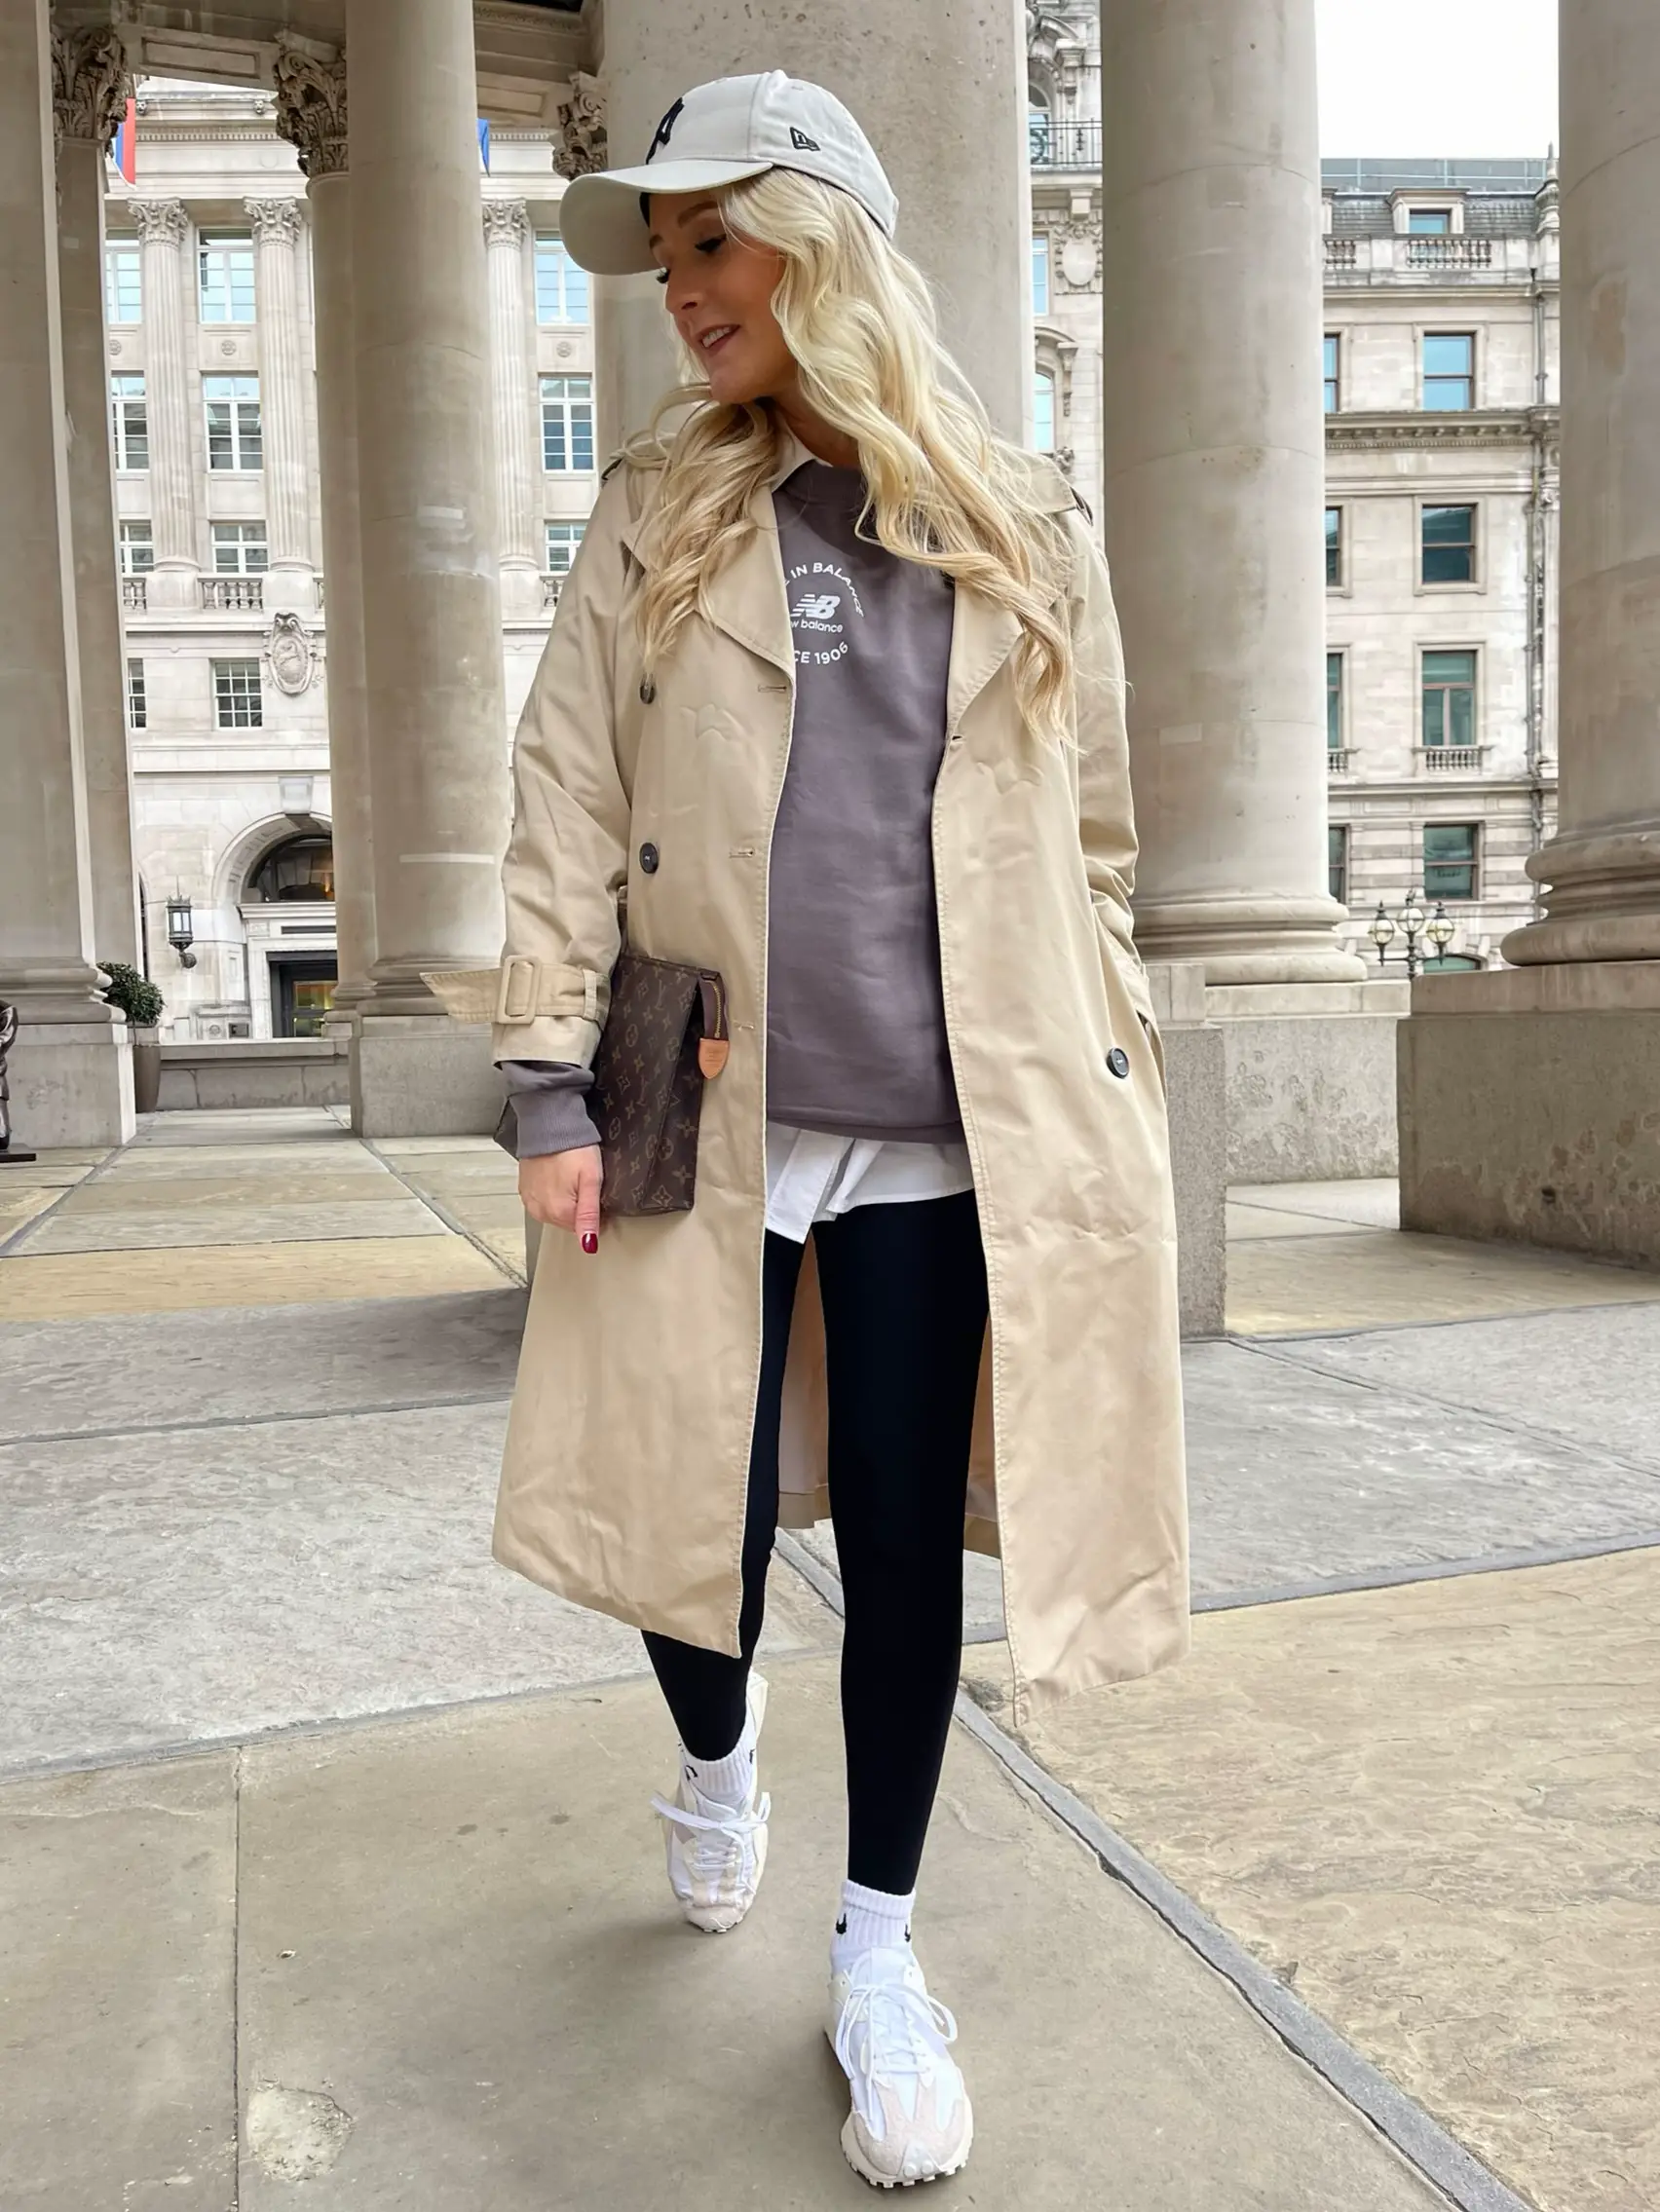 Leggings with Trenchcoat Outfits (13 ideas & outfits)